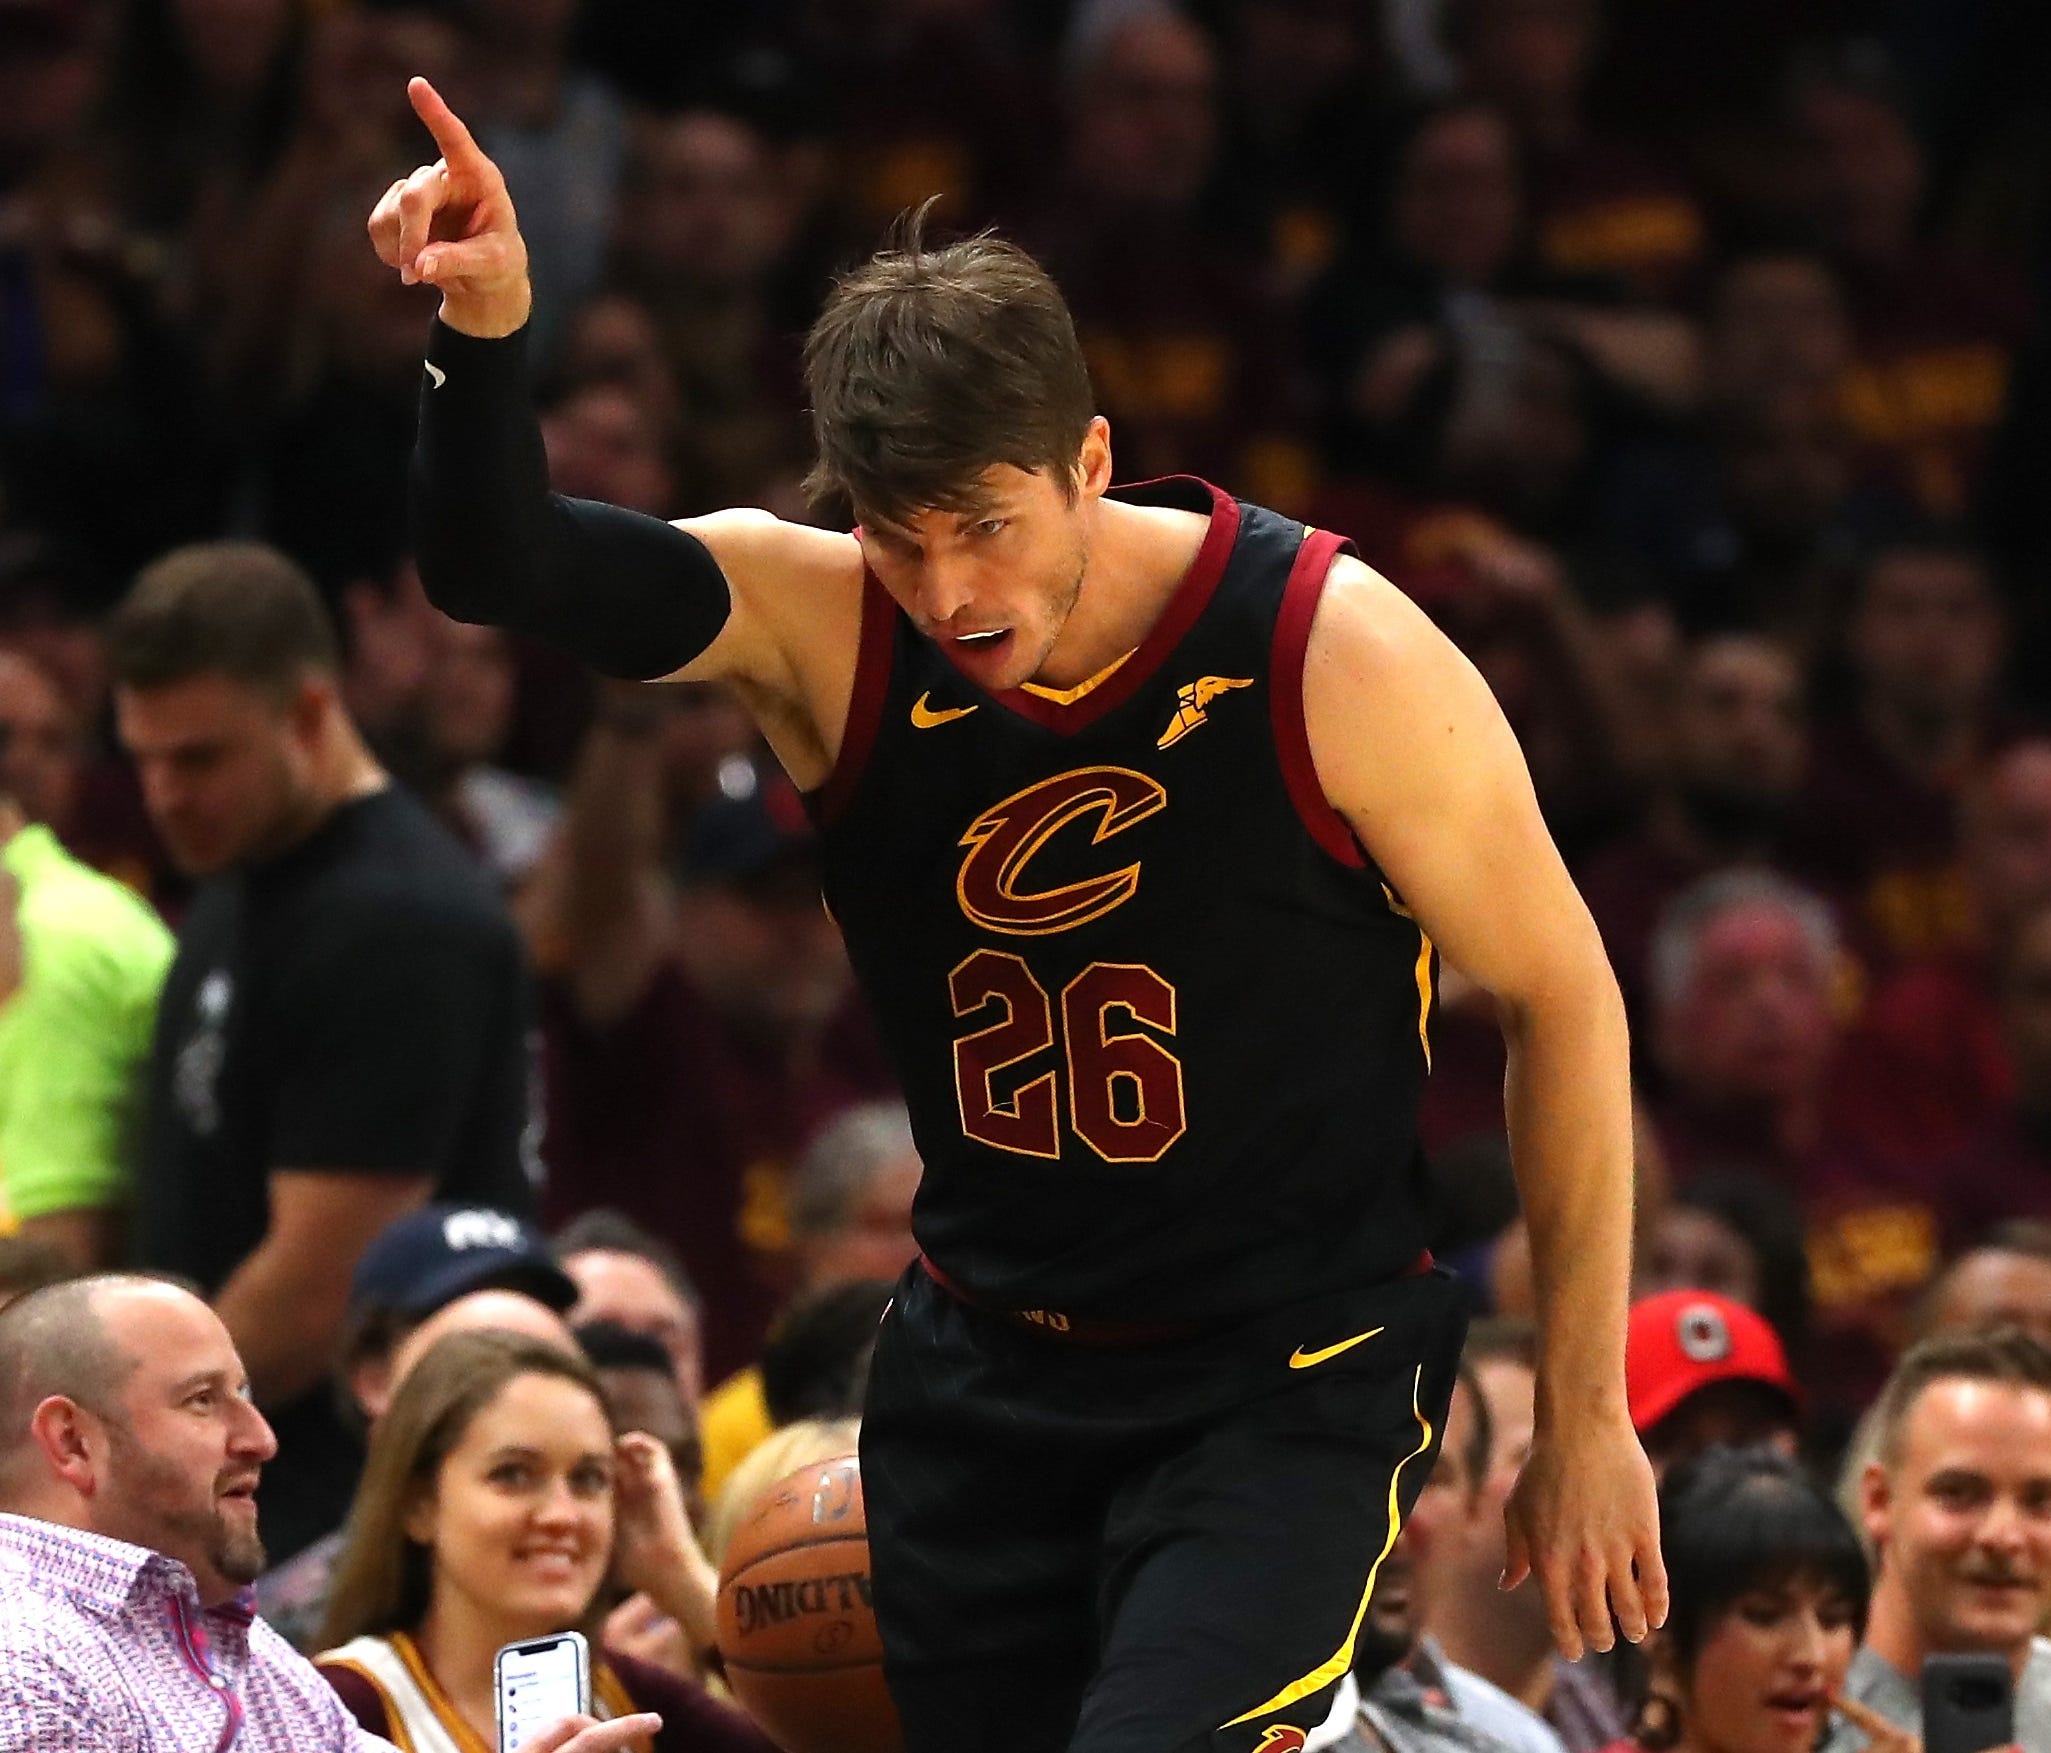 Kyle Korver had 14 points and three blocks off the bench for the Cavs in Game 4.